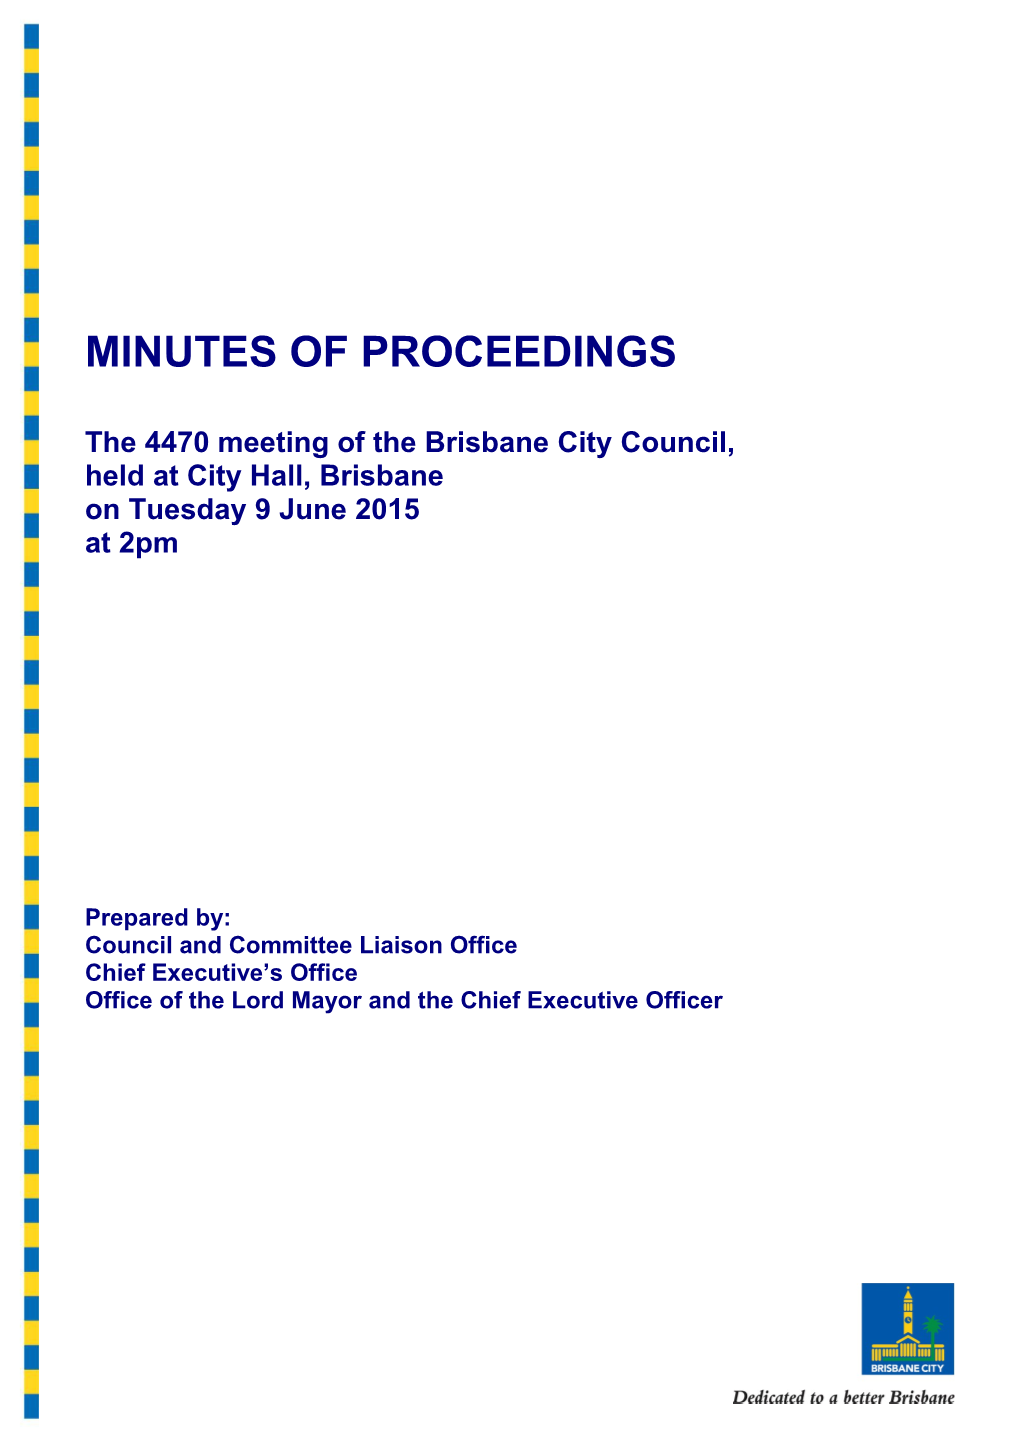 The 4470 Meeting of the Brisbane City Council